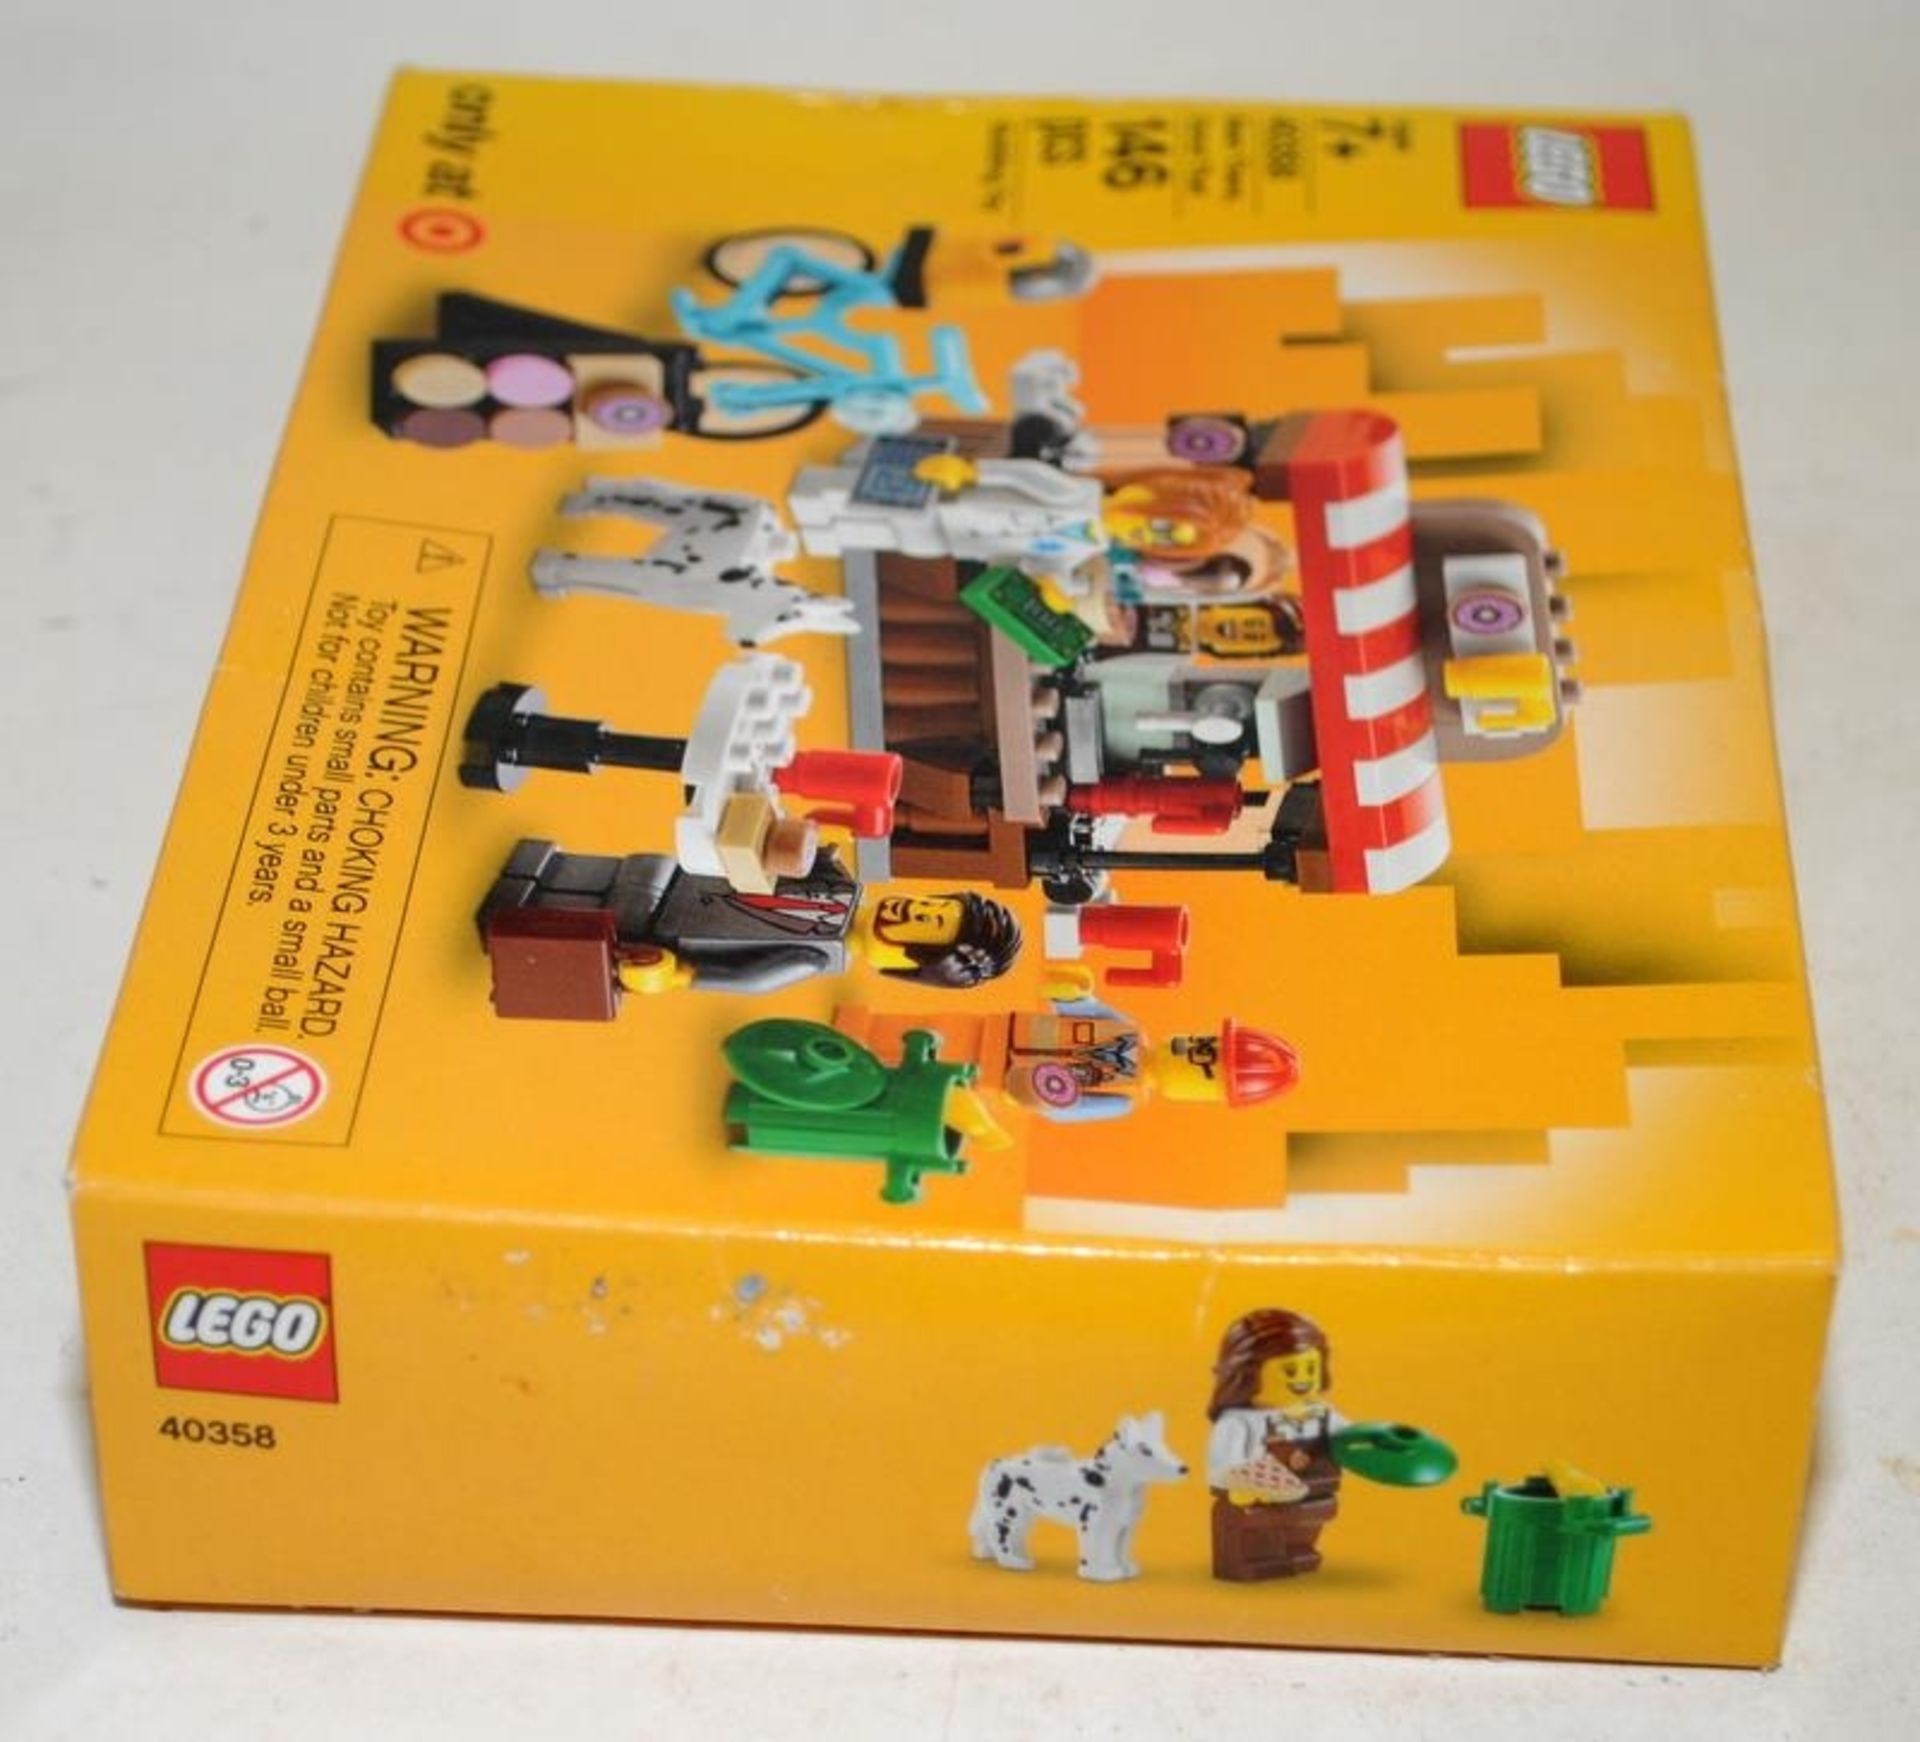 Vintage Lego boxed set: Bean There, Donut That ref:40358. Rare set, available only in the US - Image 3 of 3